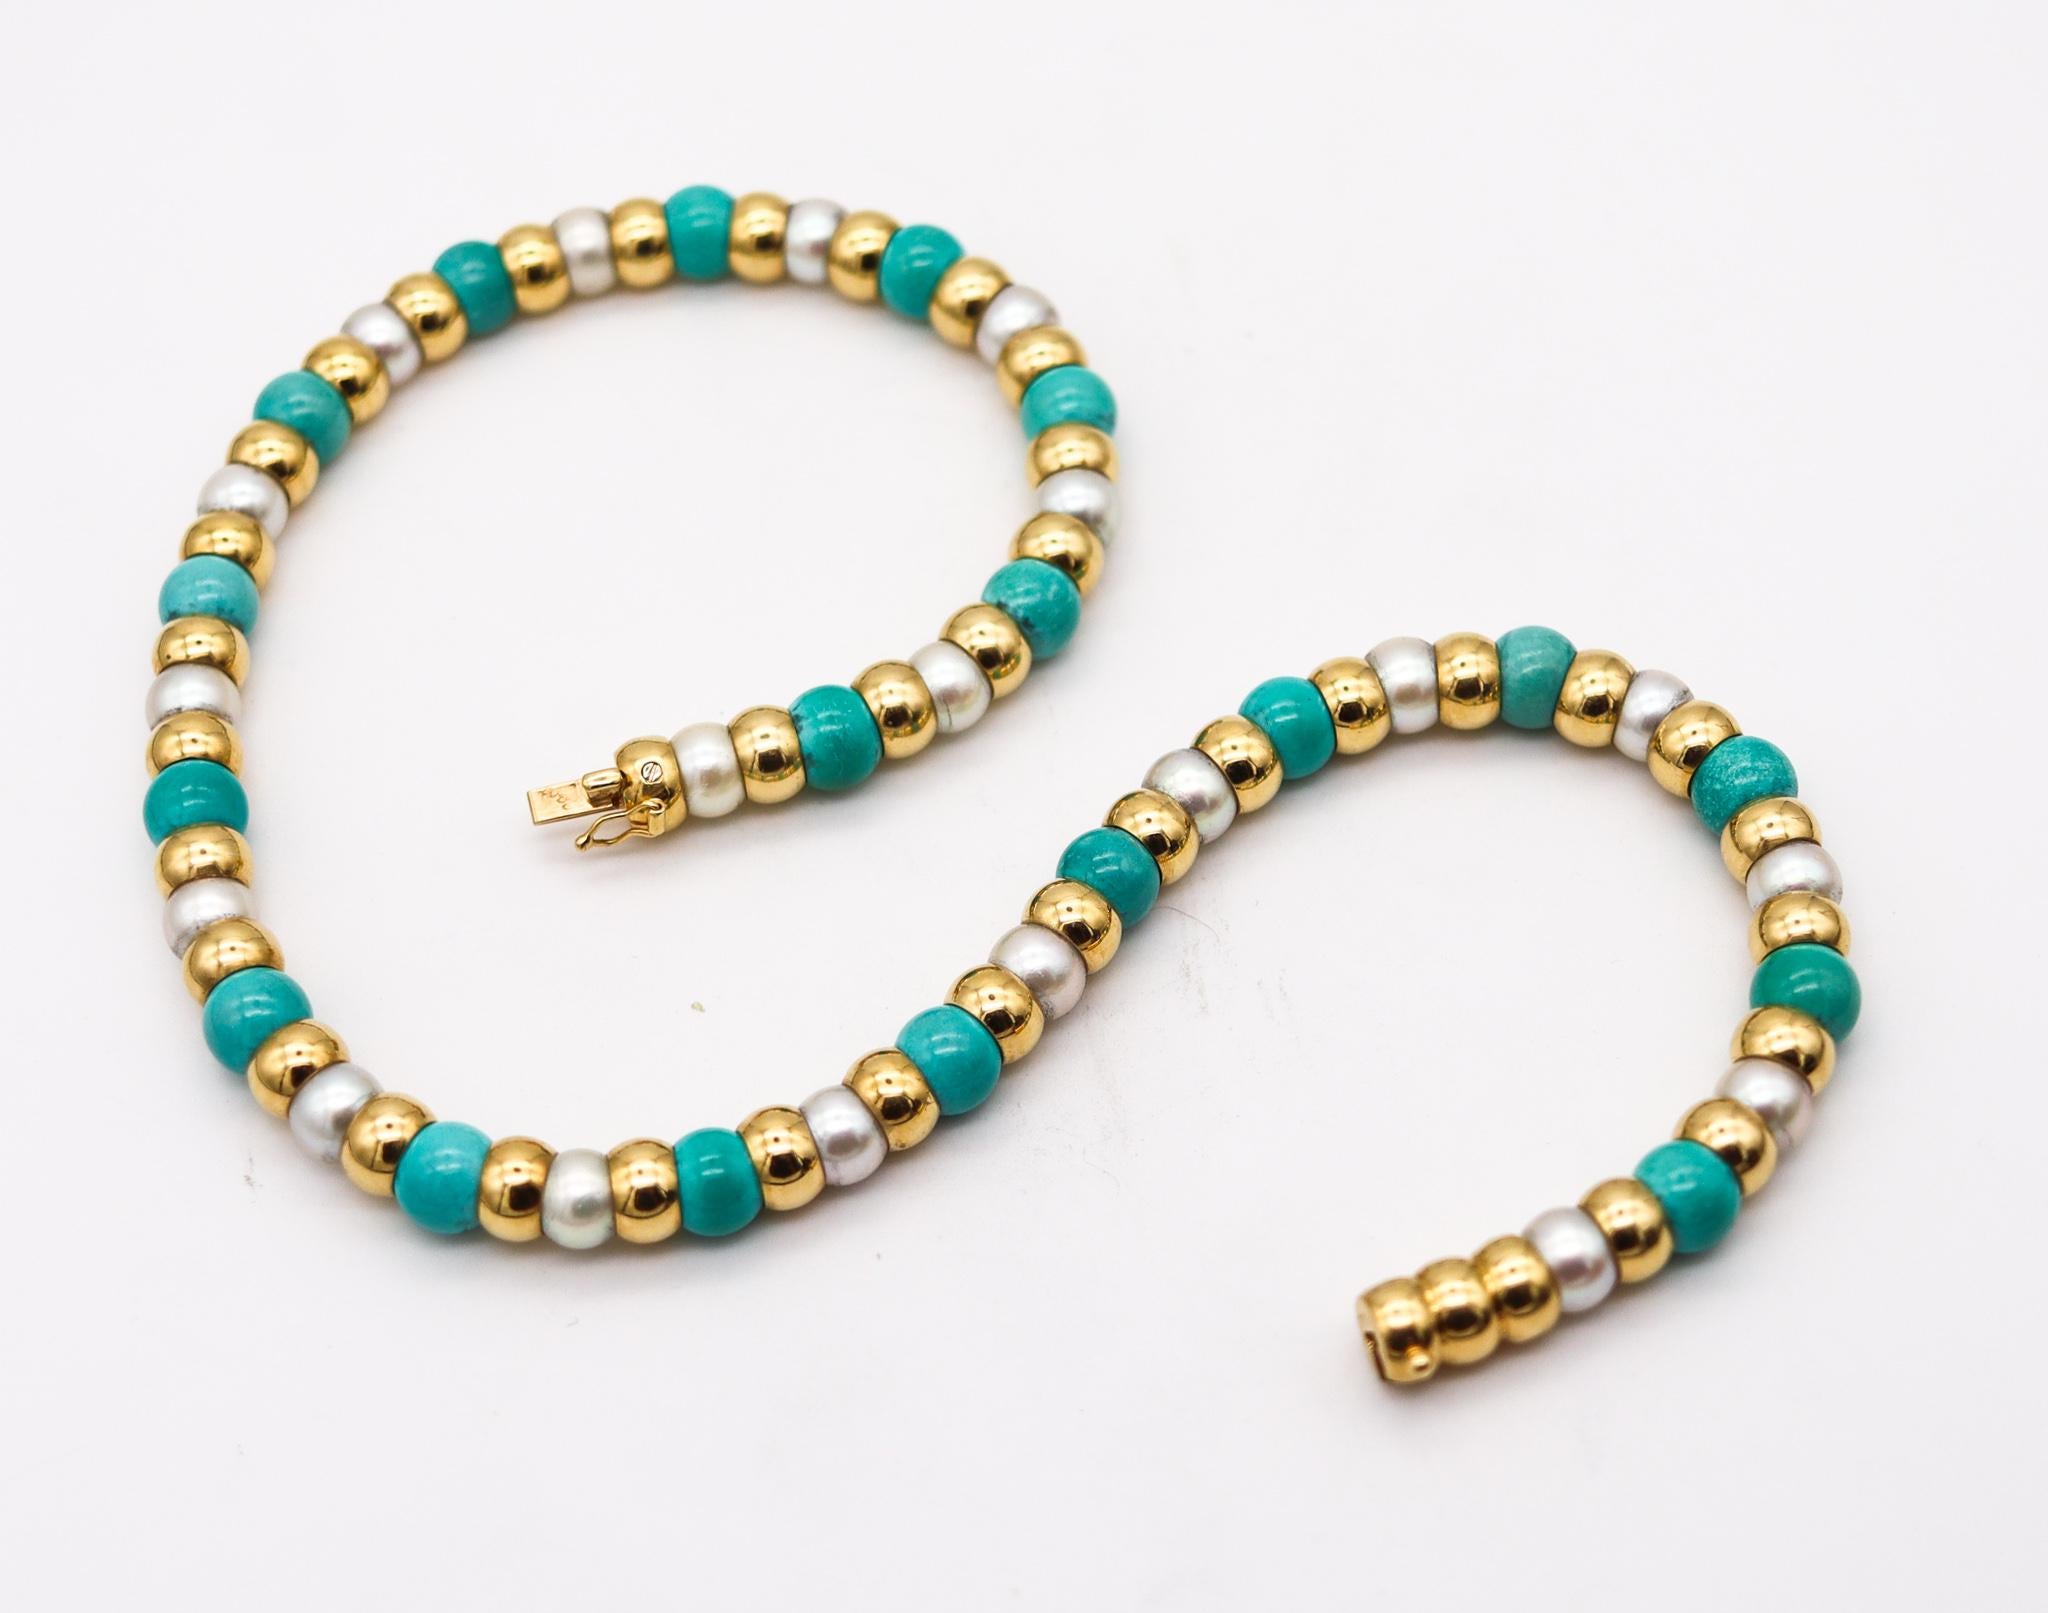 Cartier Paris Colorful Necklace in 18Kt Yellow Gold with Turquoises and Pearls 1